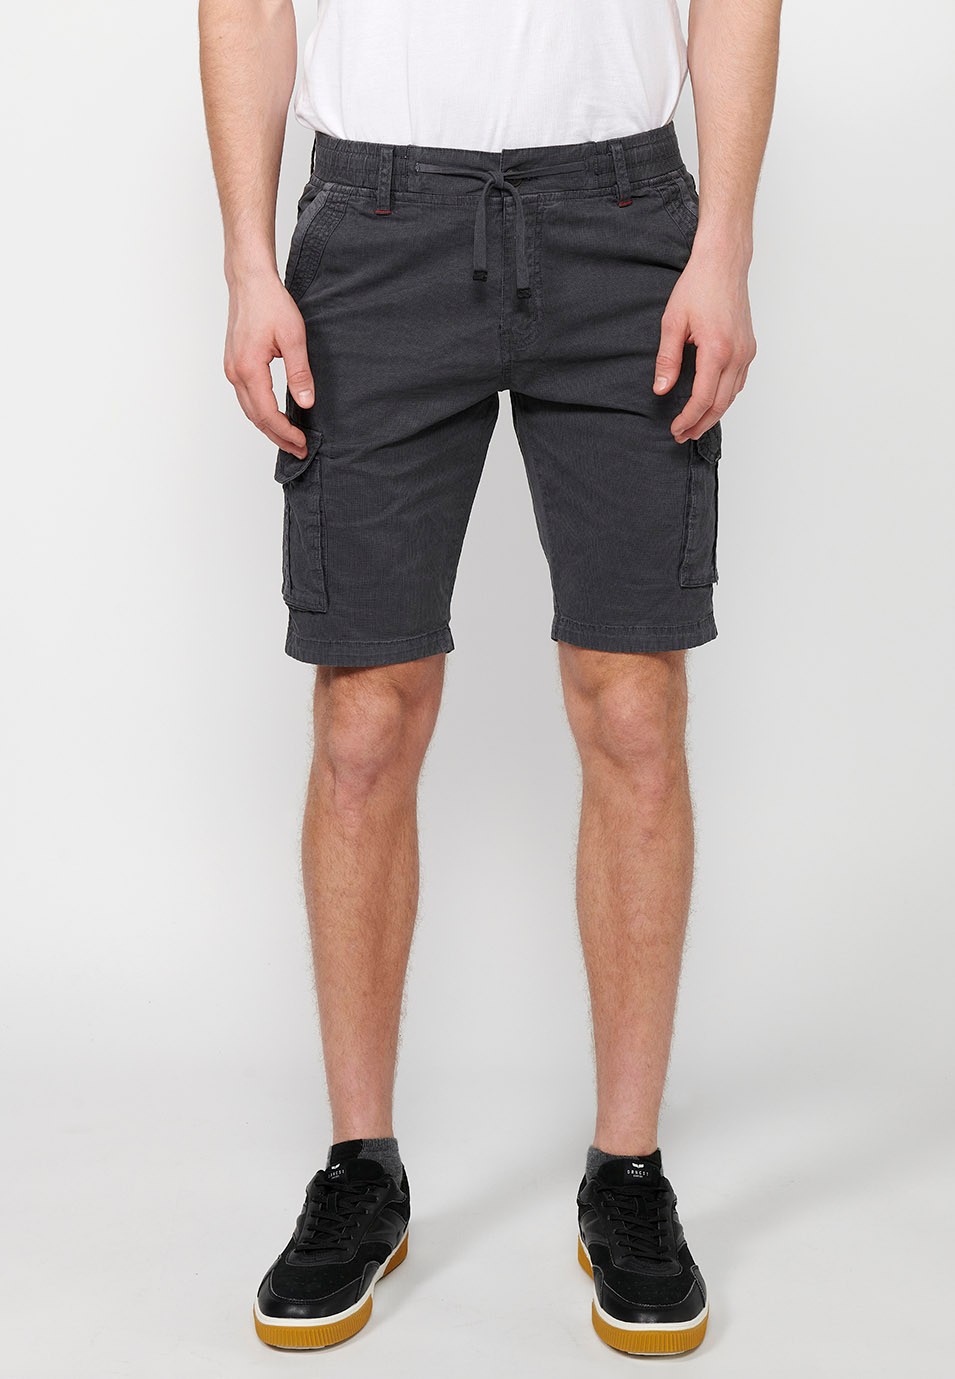 Cargo shorts with front closure with zipper and button and four pockets, two rear pockets with flap with two cargo pockets with flap and adjustable waist with drawstring in Gray for Men 3